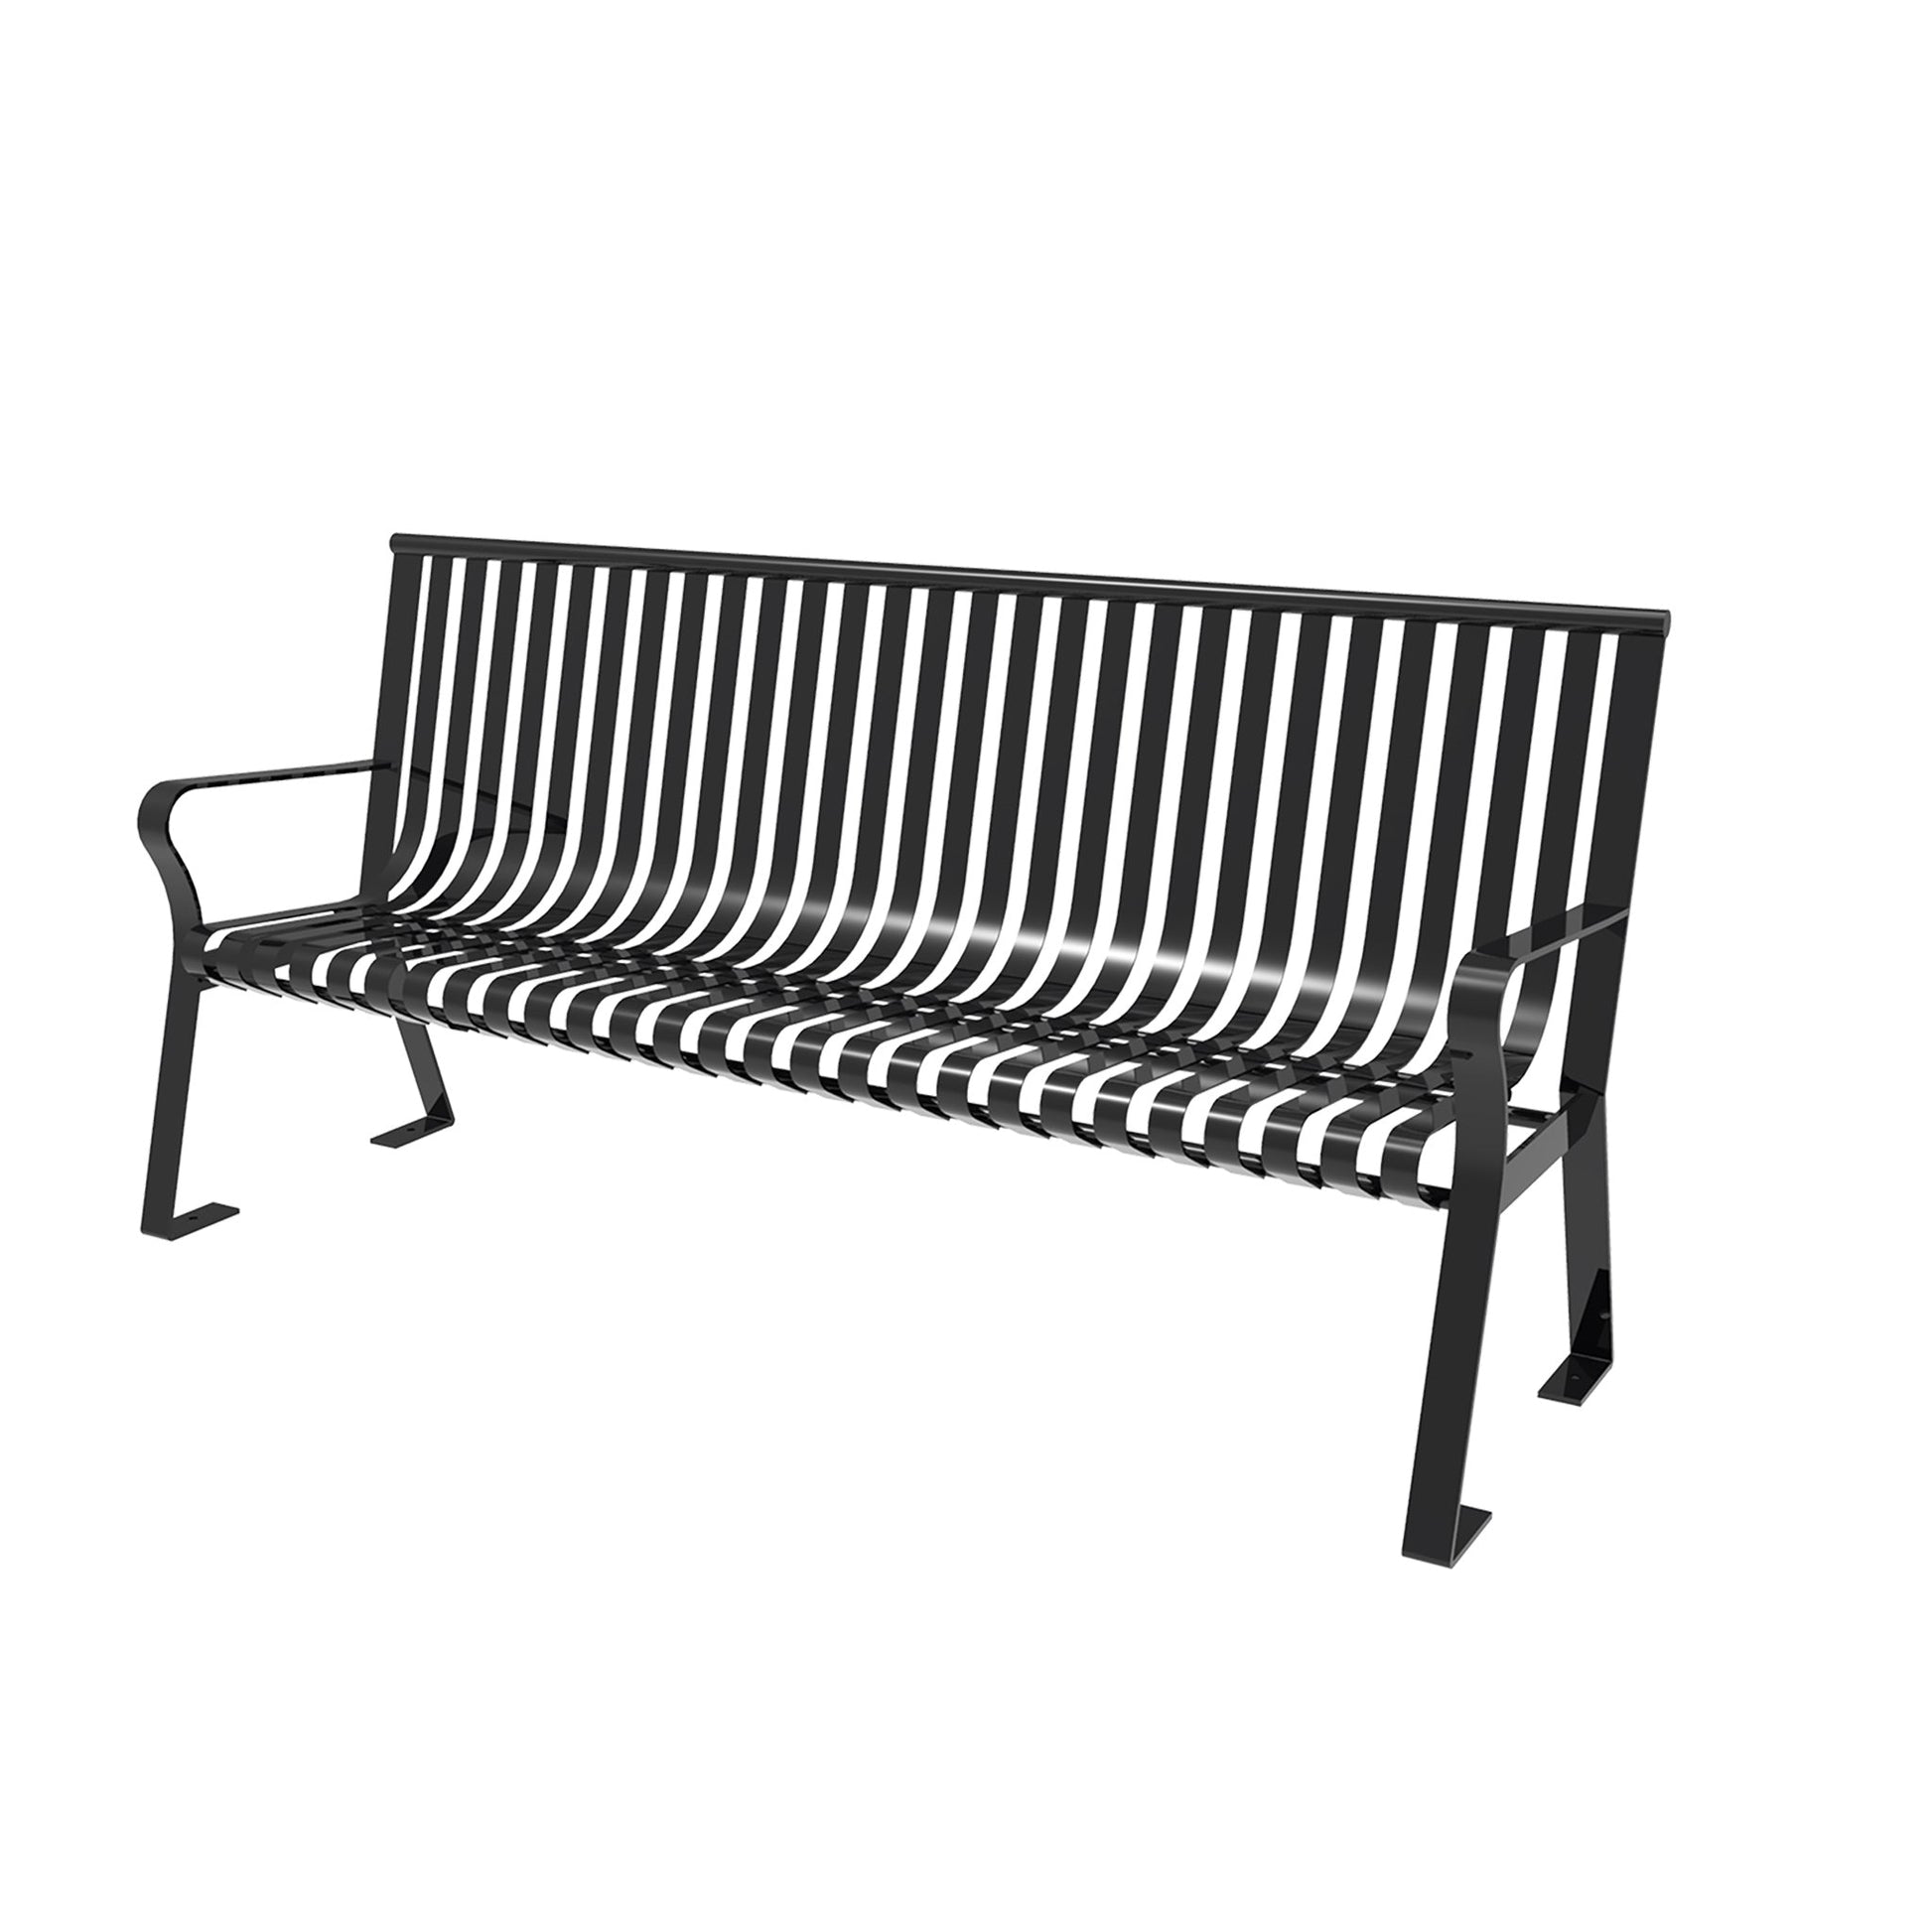 MyTcoat - Downtown Outdoor Bench with Straight Back - Strap Metal - Portable or Surface Mount 6' L (MYT - BDT06 - I - 55) - SchoolOutlet